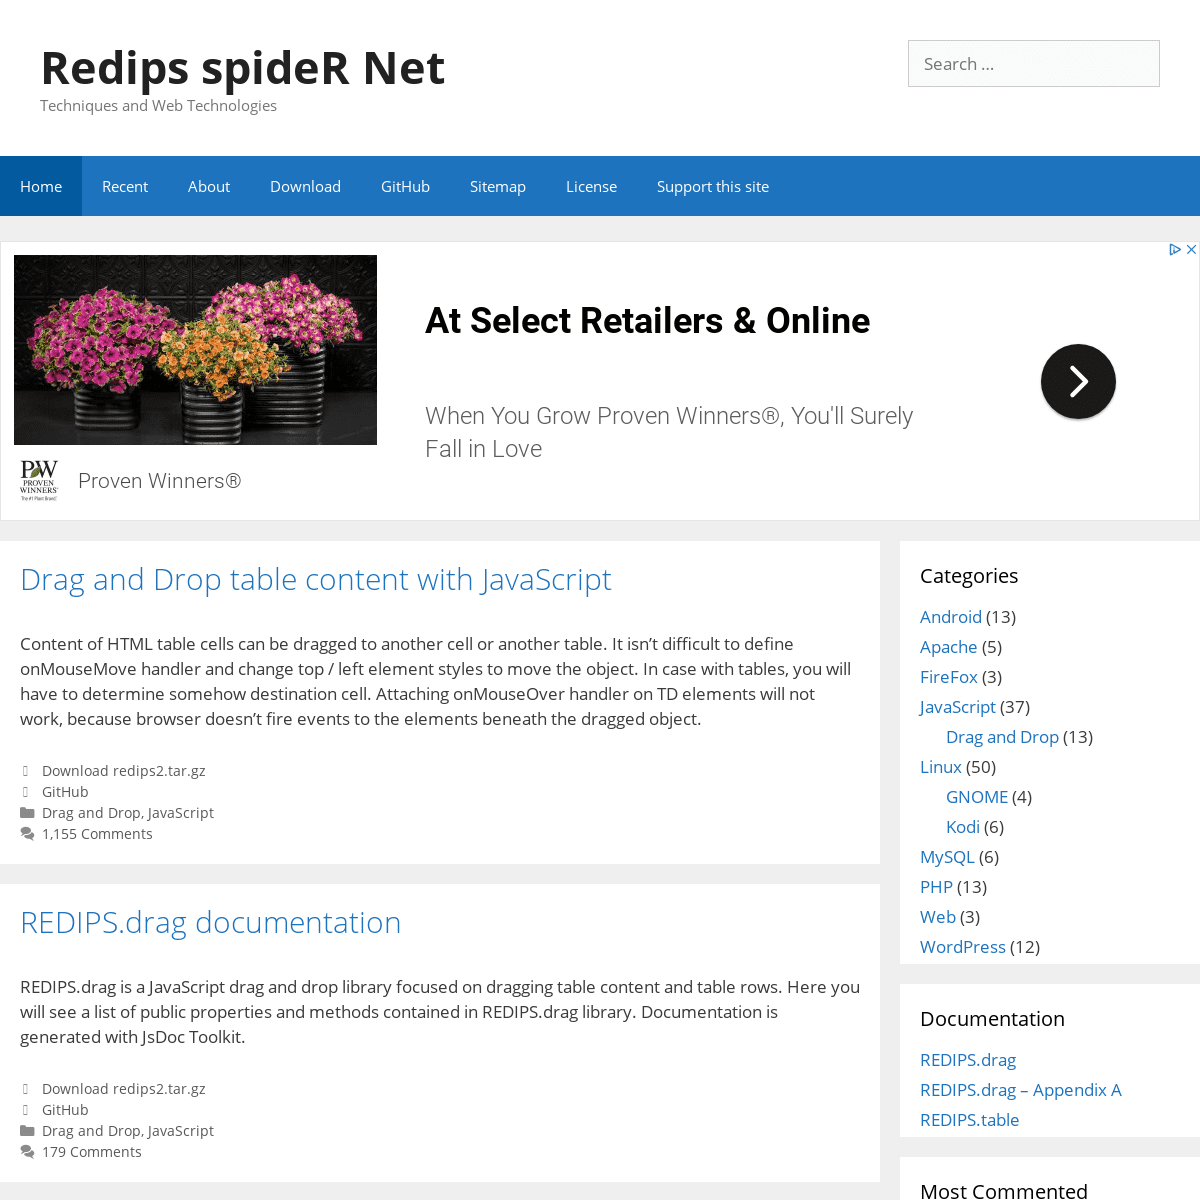 A complete backup of redips.net